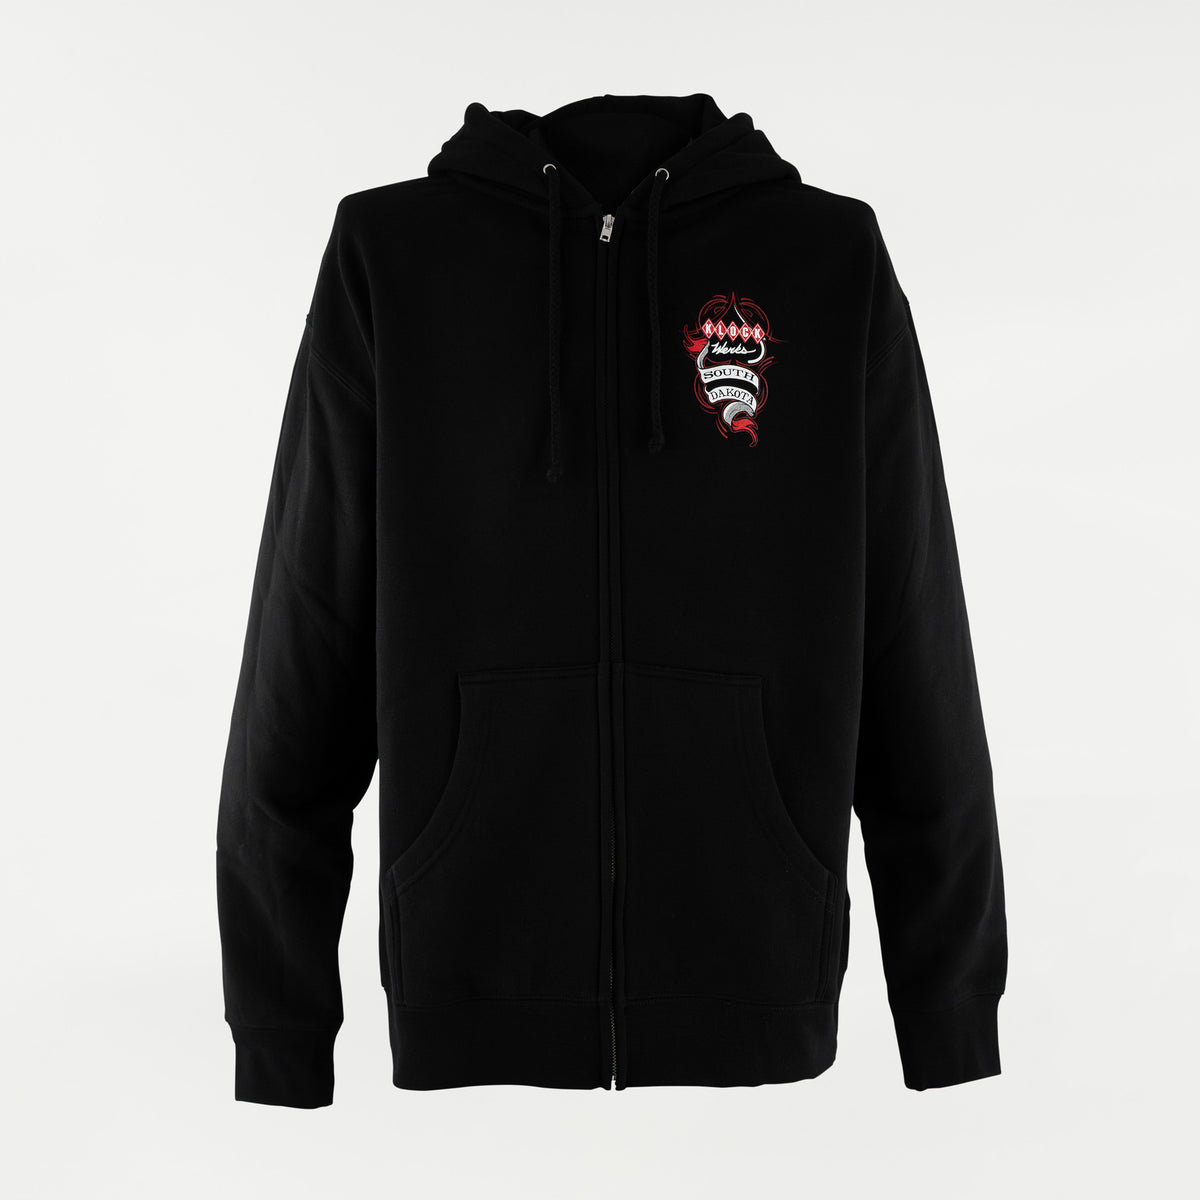 Black Zip-Up Hoodie with Spark Plug Design on Front Chest 